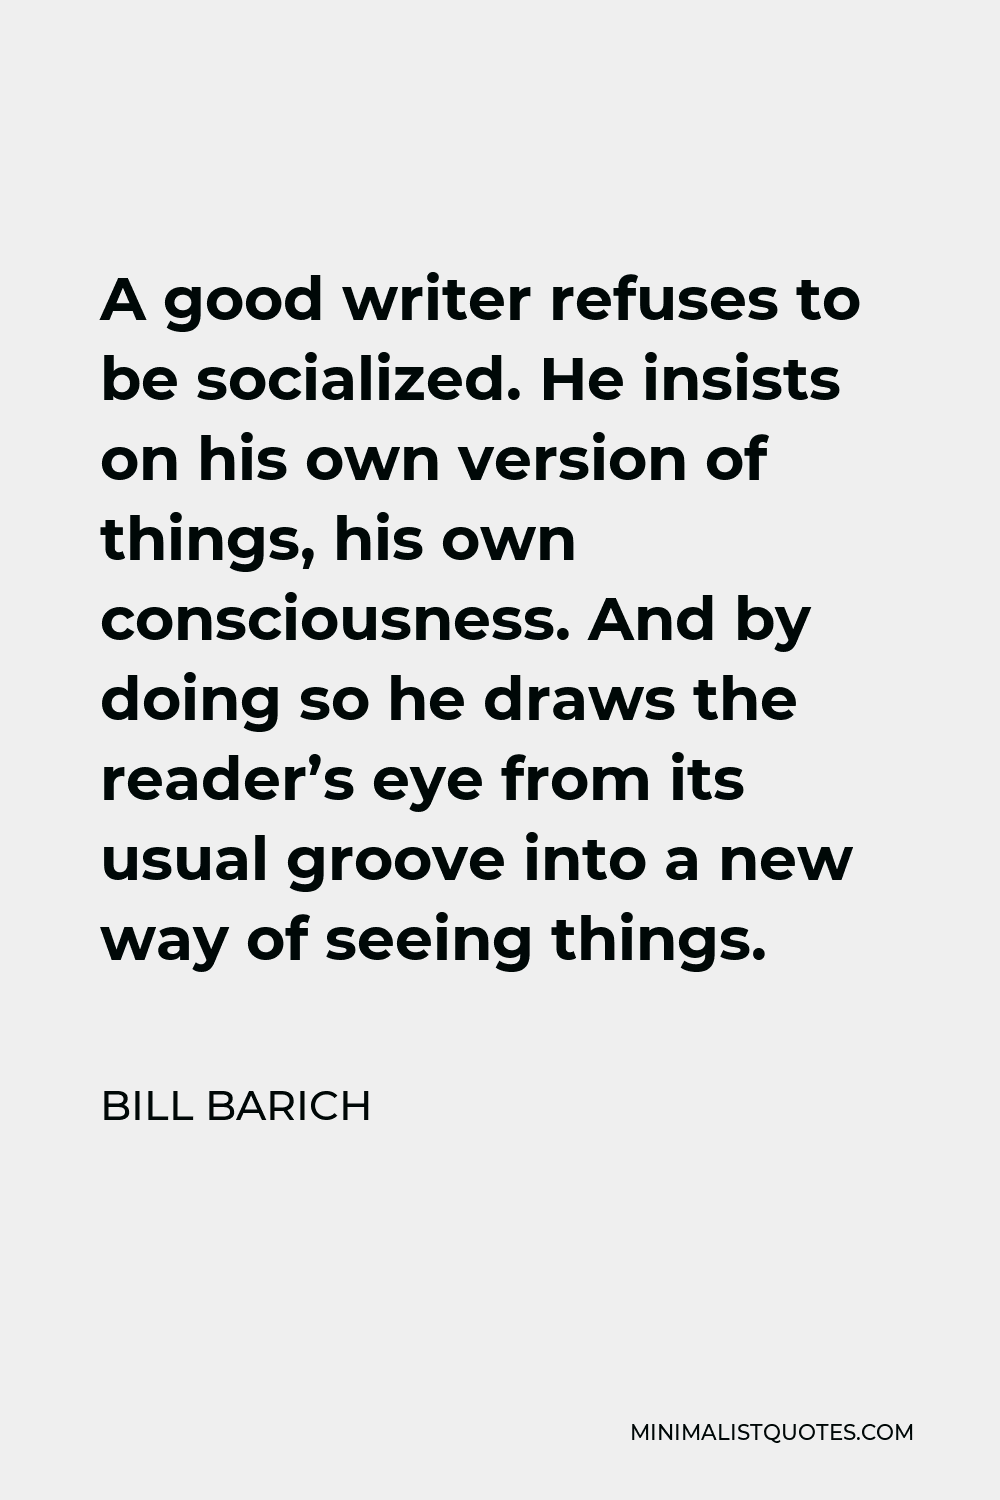 Bill Barich Quote - A good writer refuses to be socialized. He insists on his own version of things, his own consciousness. And by doing so he draws the reader’s eye from its usual groove into a new way of seeing things.